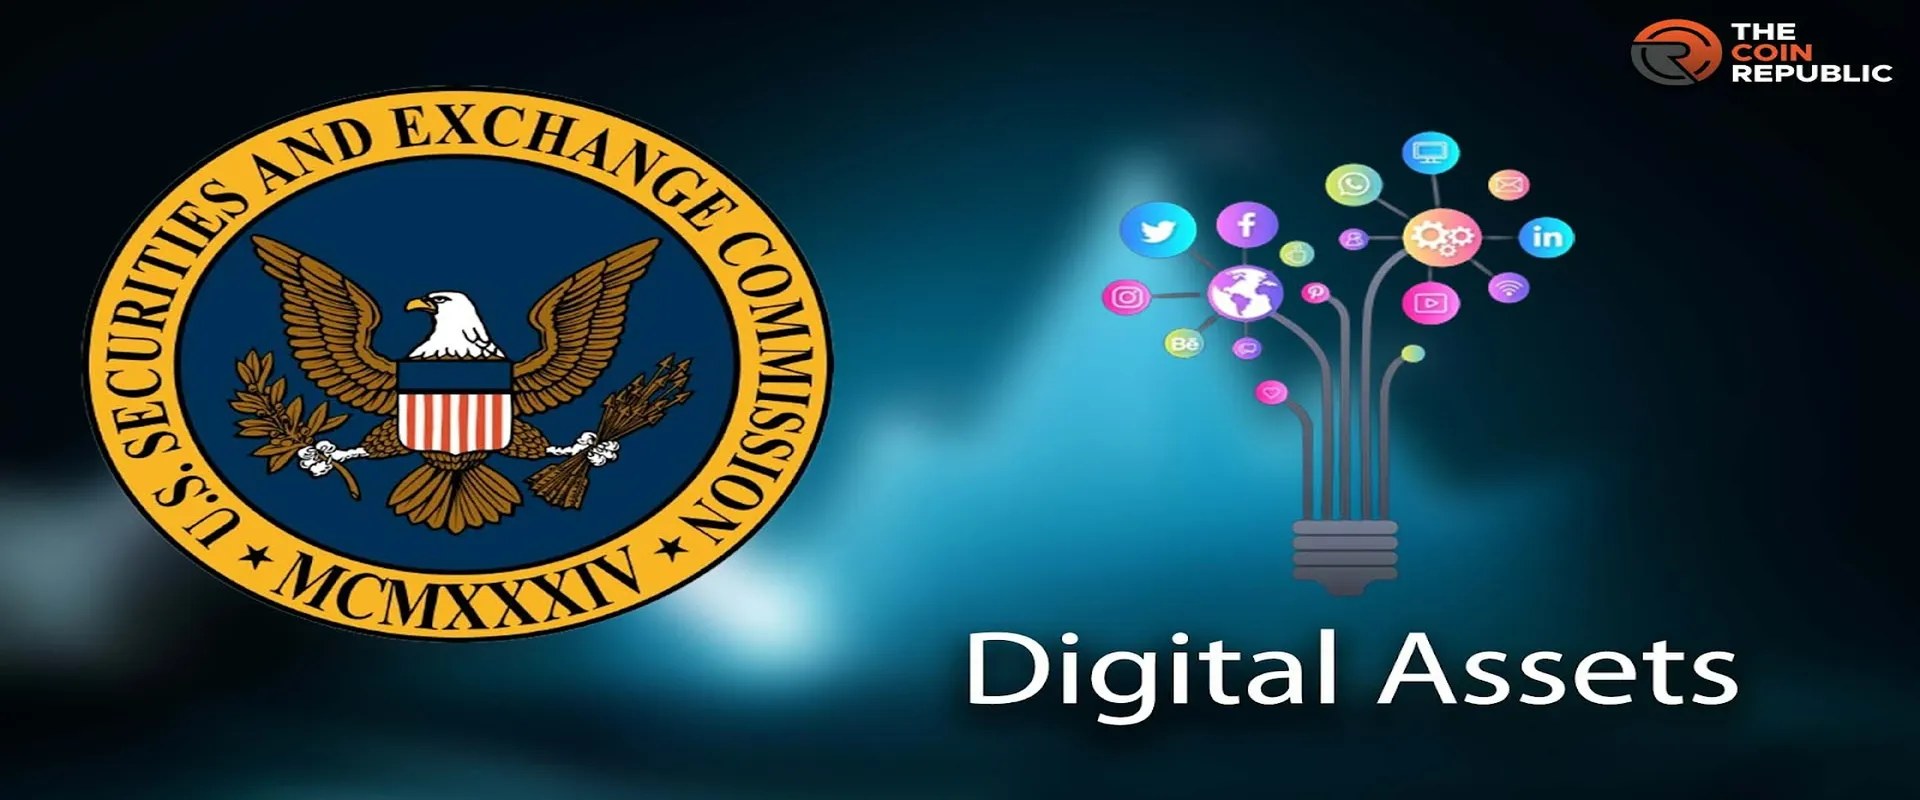 SEC Excludes defining Digital Assets in their new hedge fund rule